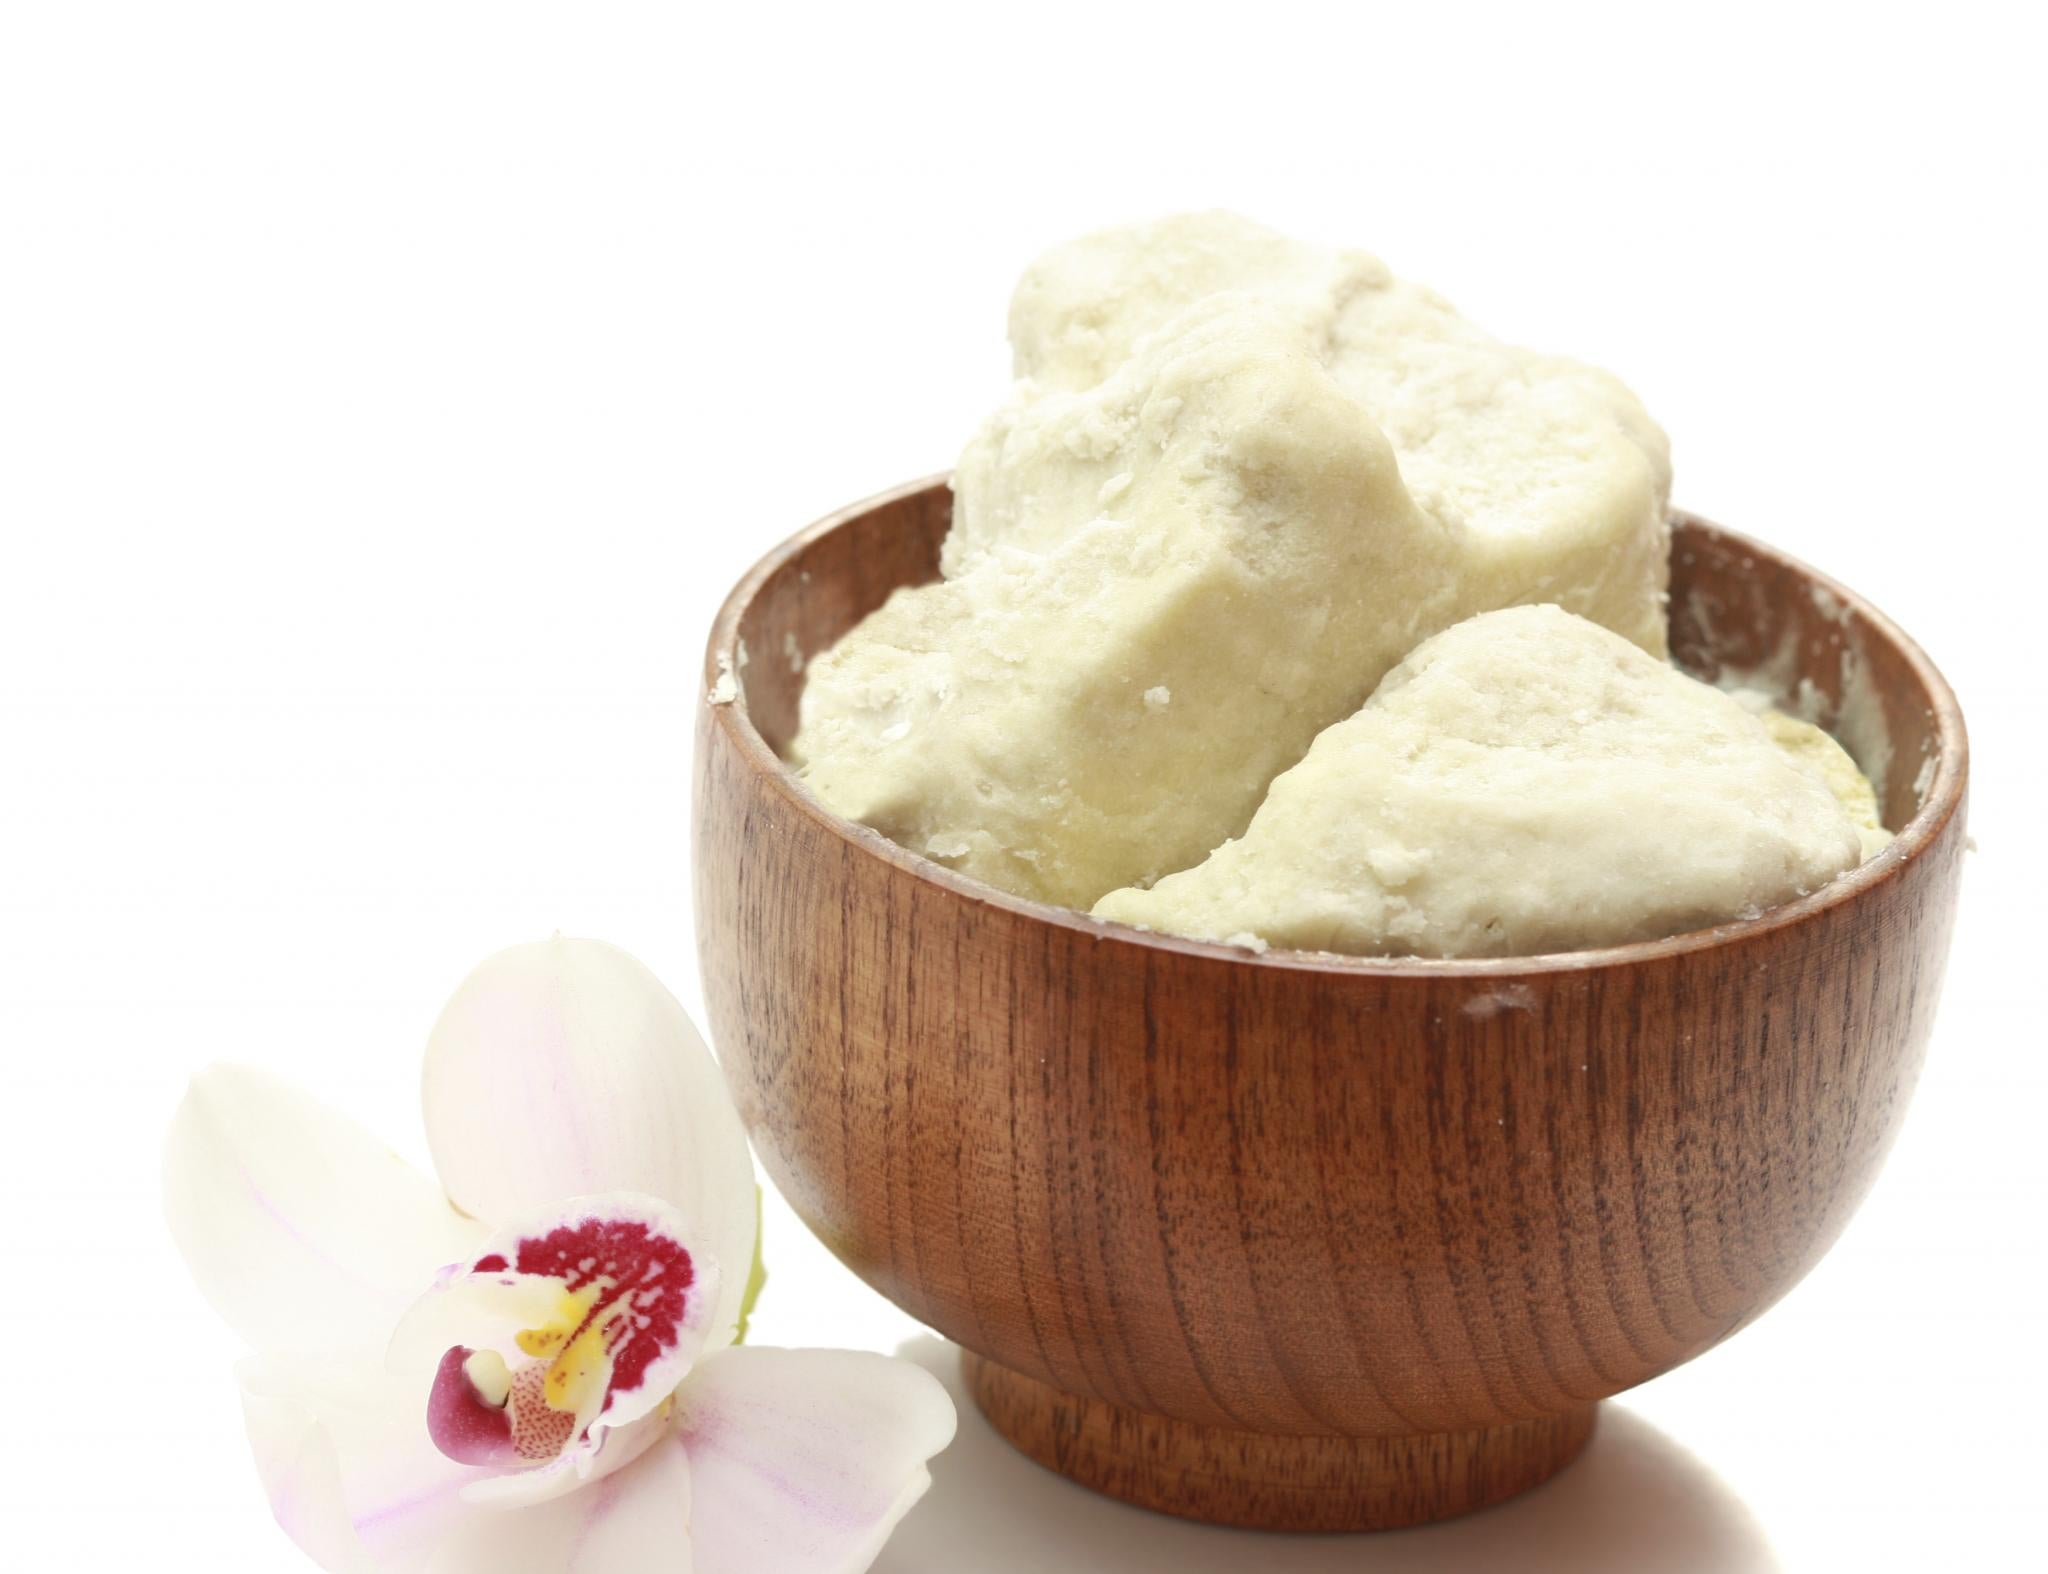 5 Facts About Shea Butter You Didn't Know